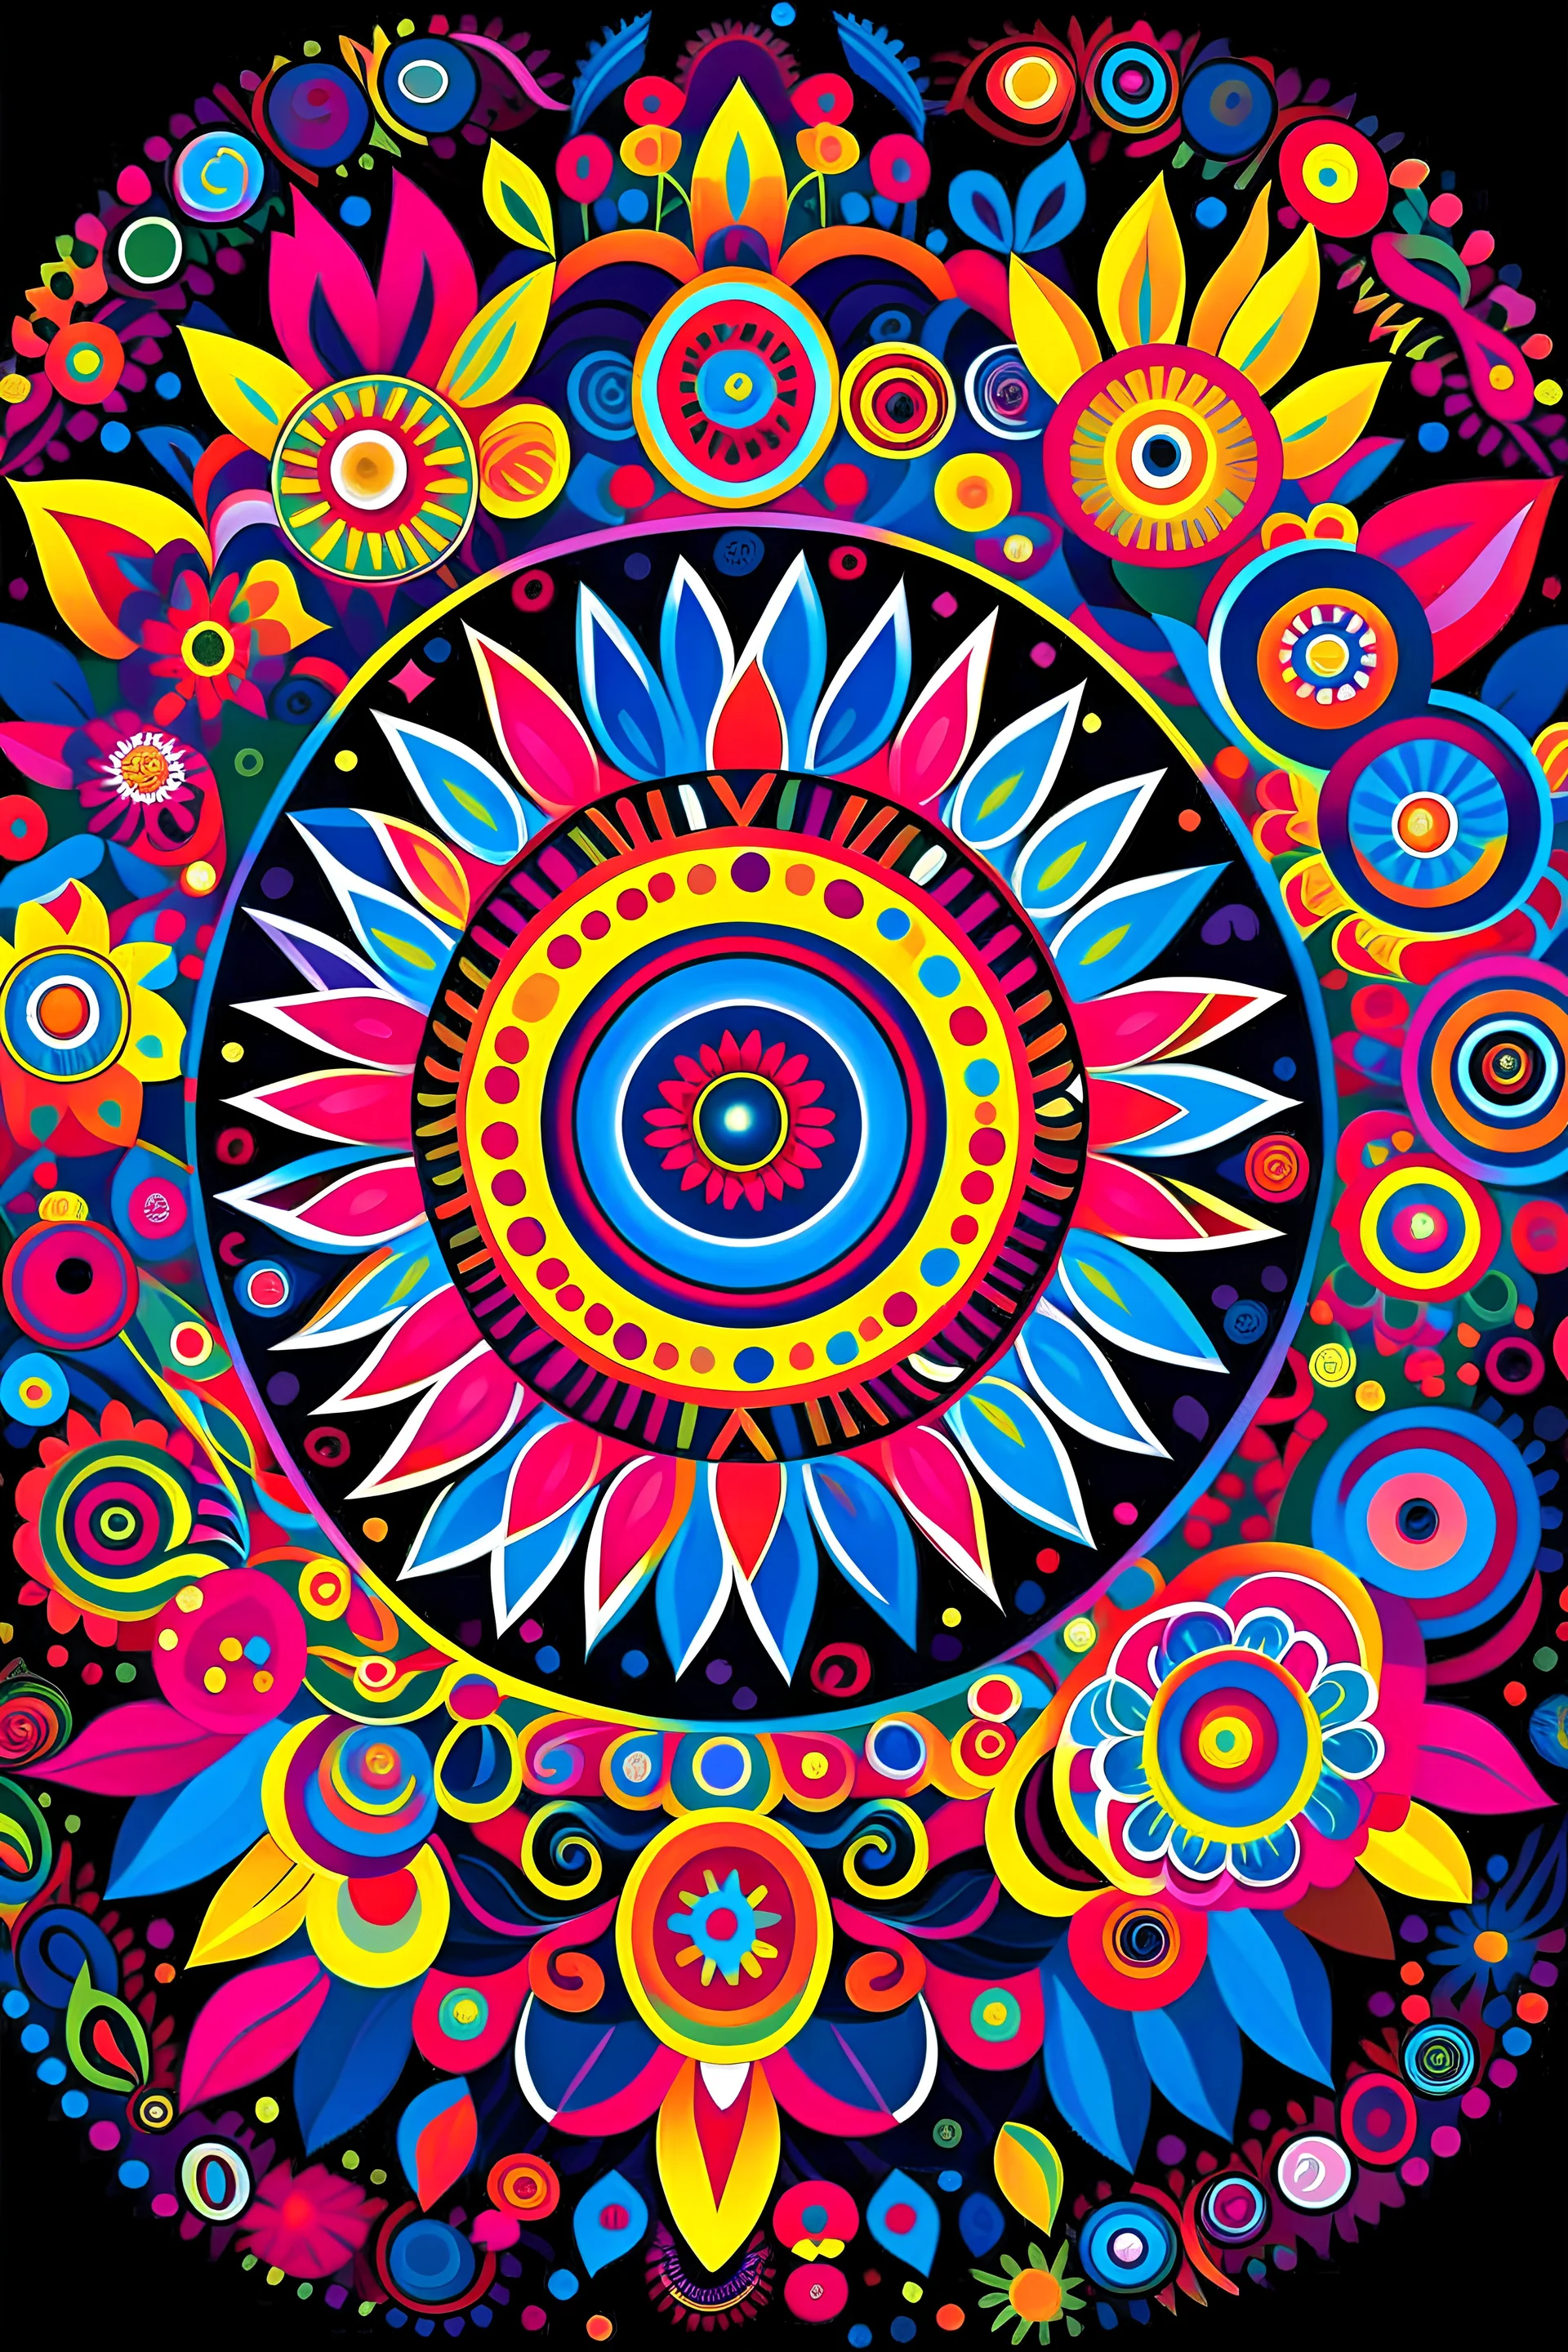 "Vibrant Visions: A Kaleidoscope of Colors" Subtitle: "Unleash Your Creativity with BrightColor Design Concept: Create a central mandala surrounded by a burst of vibrant colors, radiating energy and creativity. Incorporate elements like swirling patterns, intricate details, and floral motifs within the mandala. Surround the mandala with a dynamic background featuring bold splashes of bright colors like electric blue